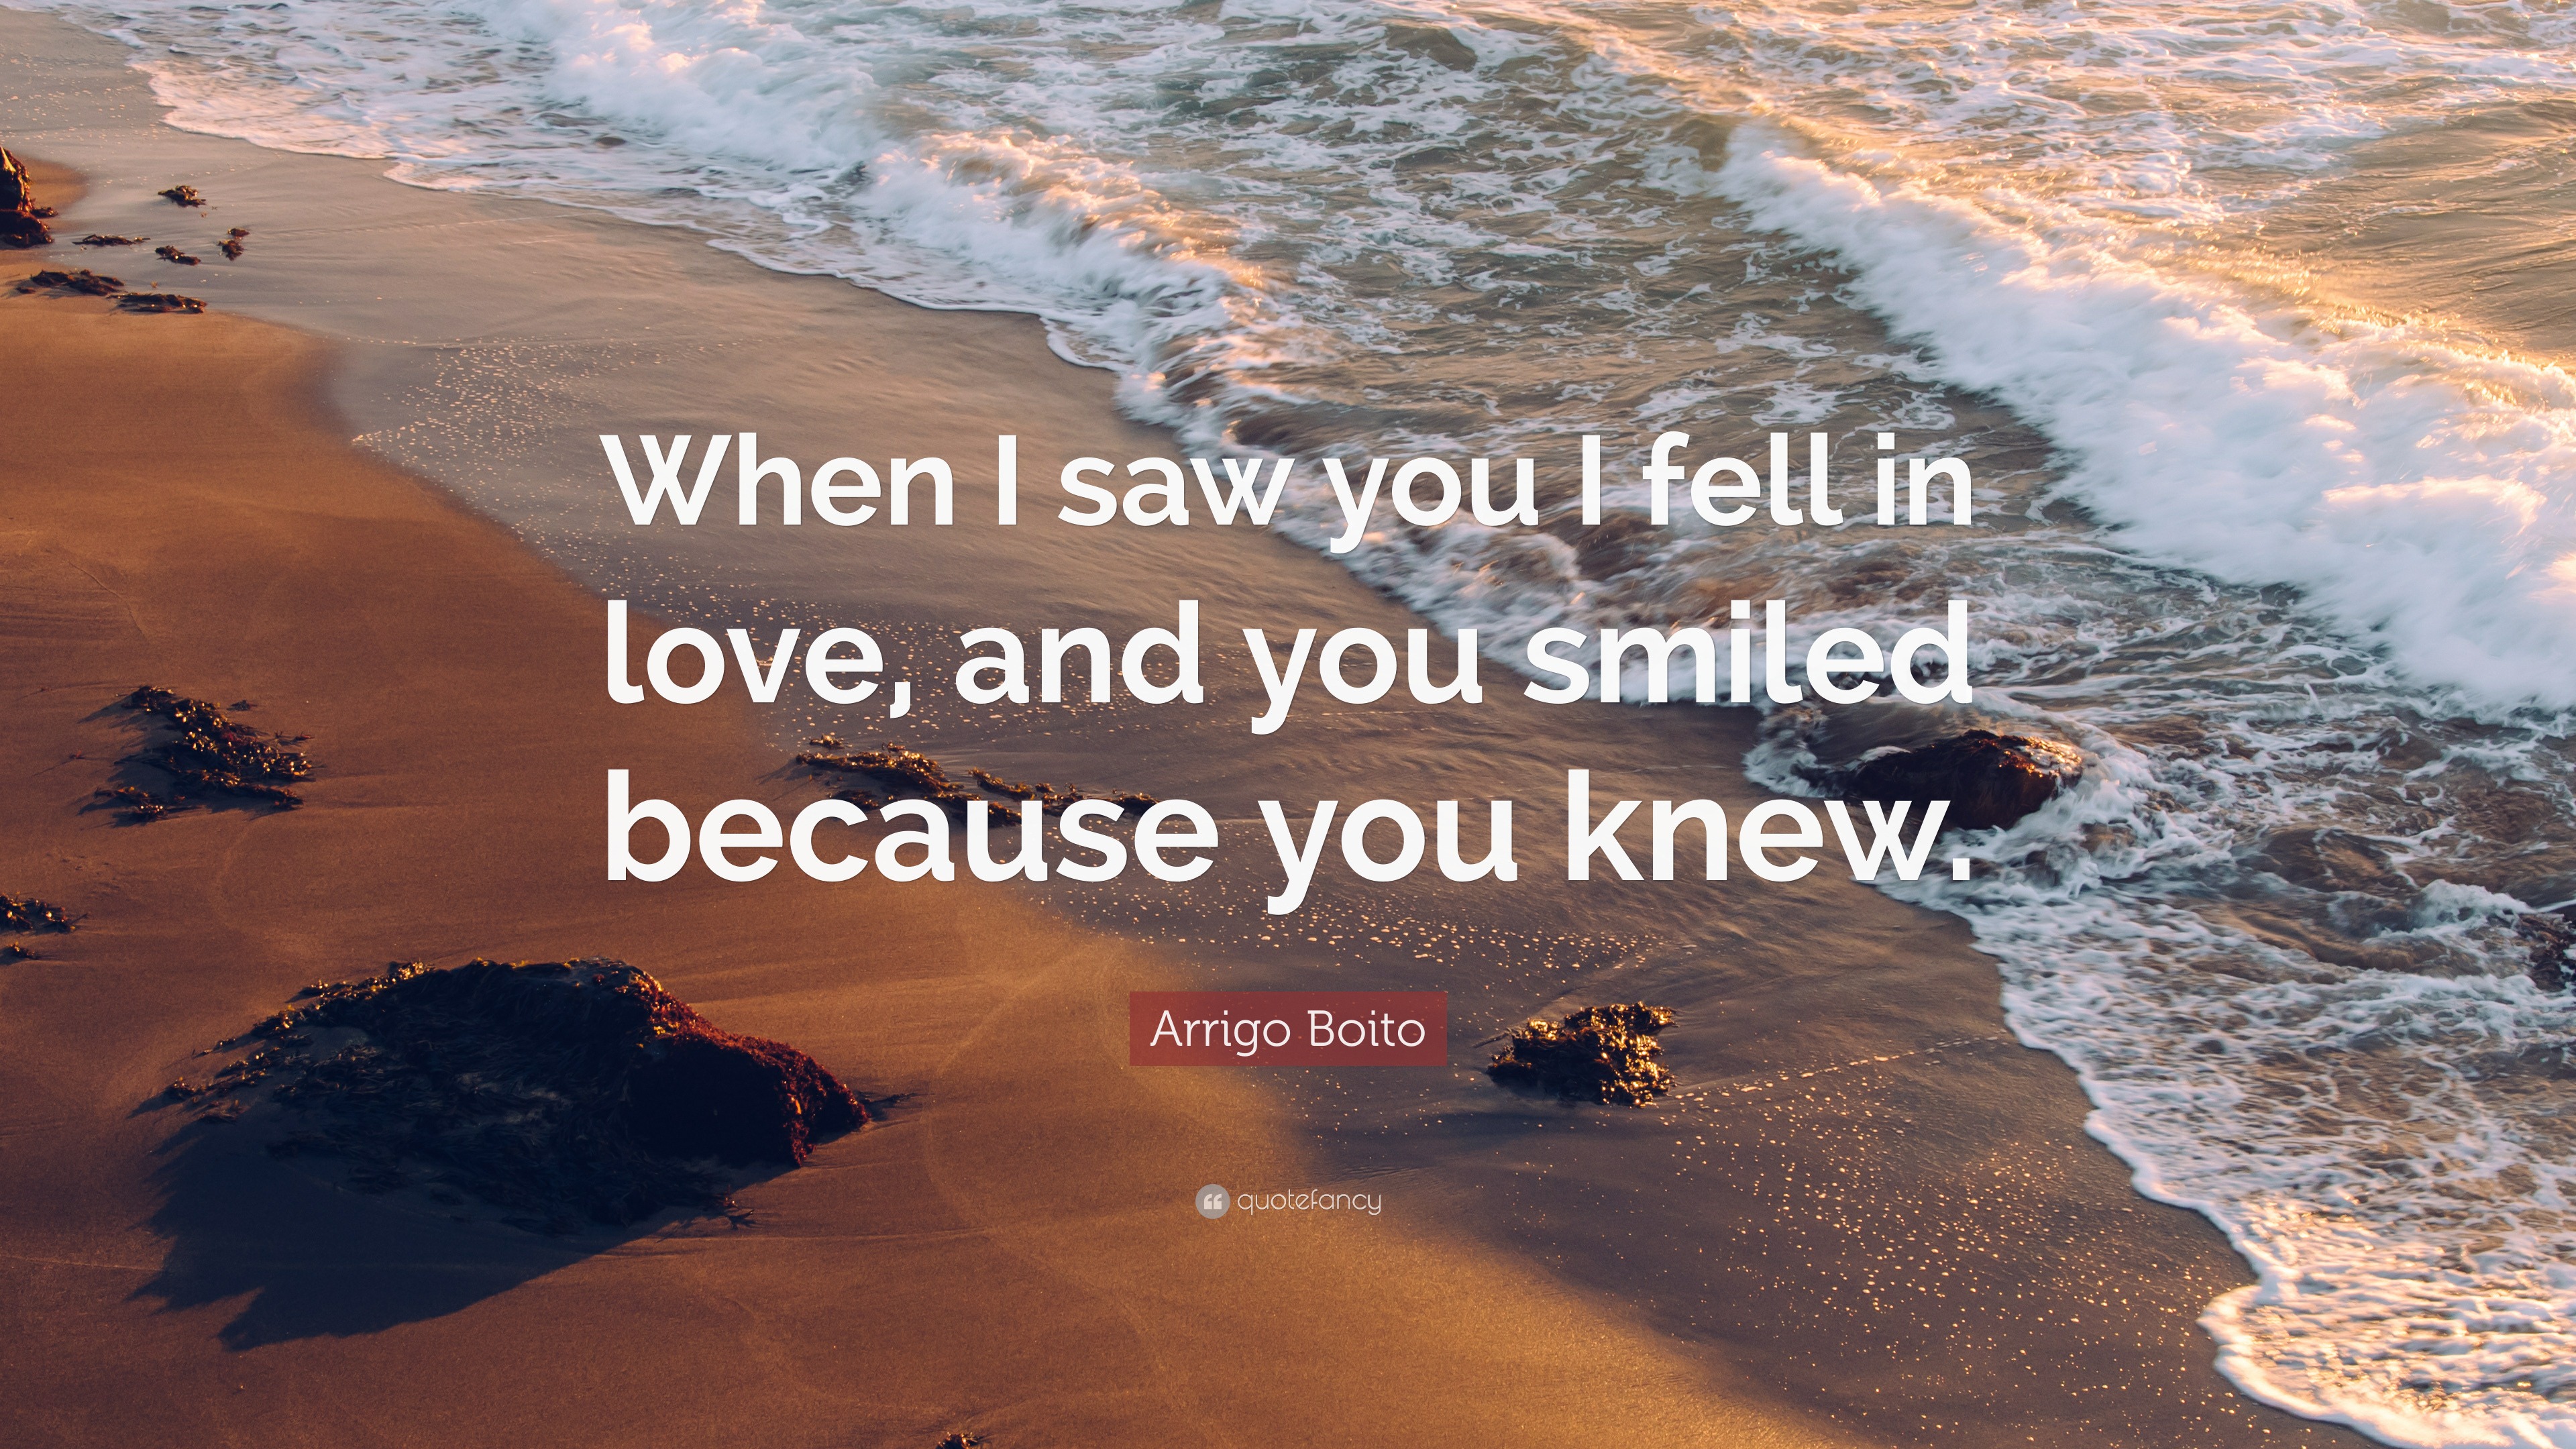 Arrigo Boito Quote: “When I saw you I fell in love, and you smiled